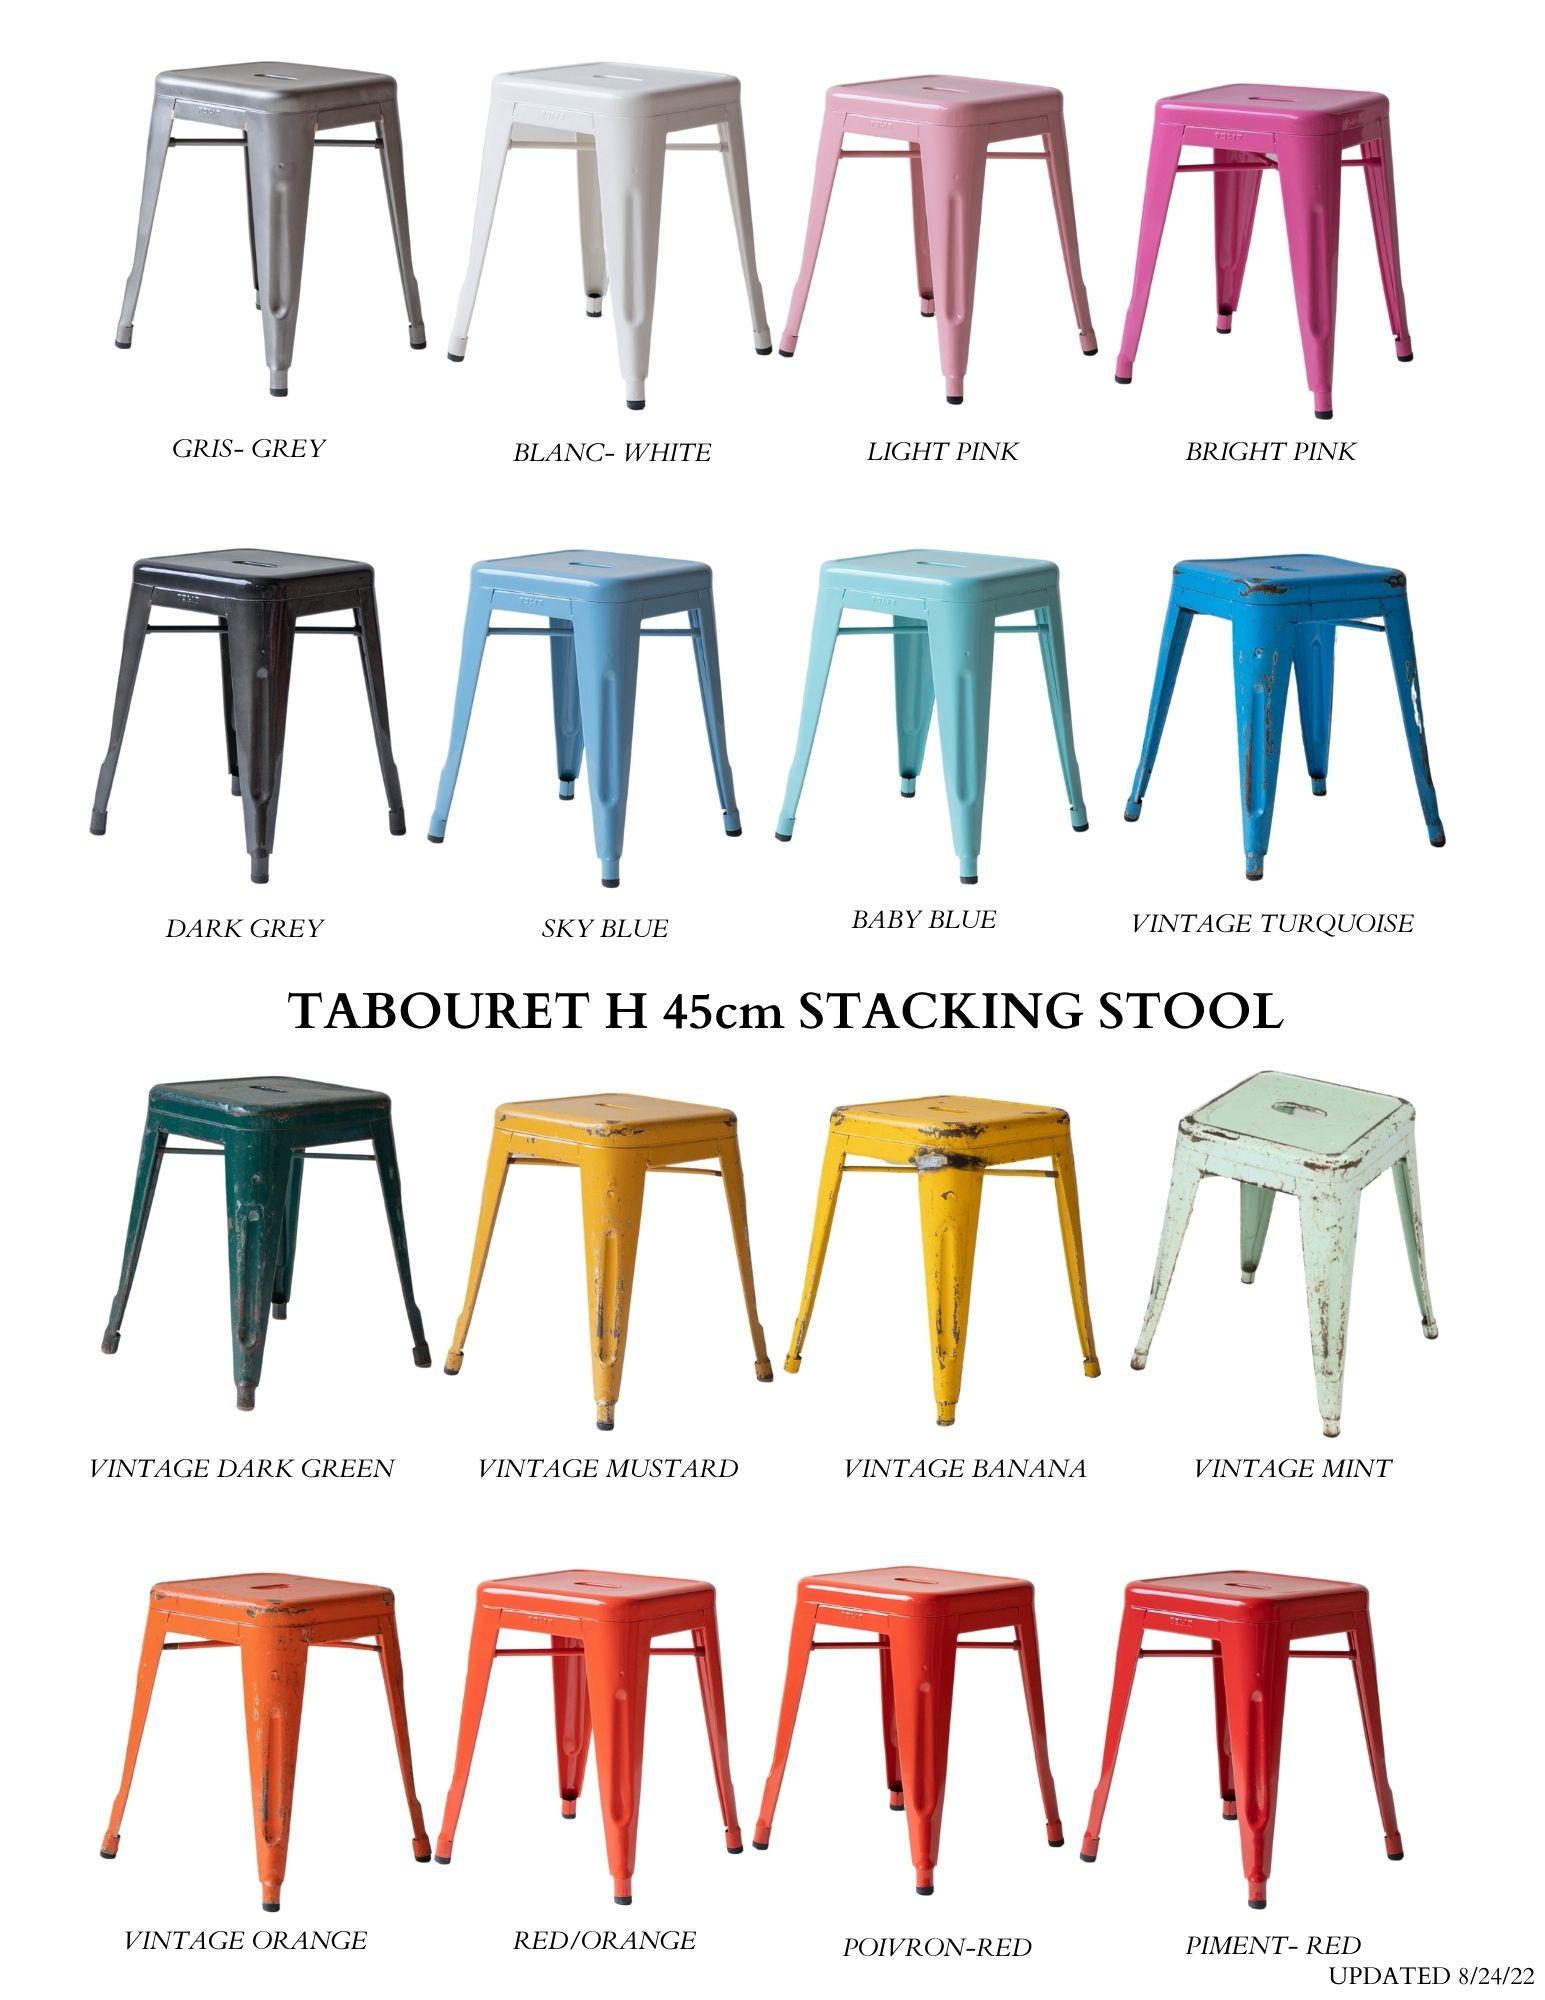 Authentic French Tolix Stacking Steel Stools in '3' Heights, Myriad of Colors  For Sale 4